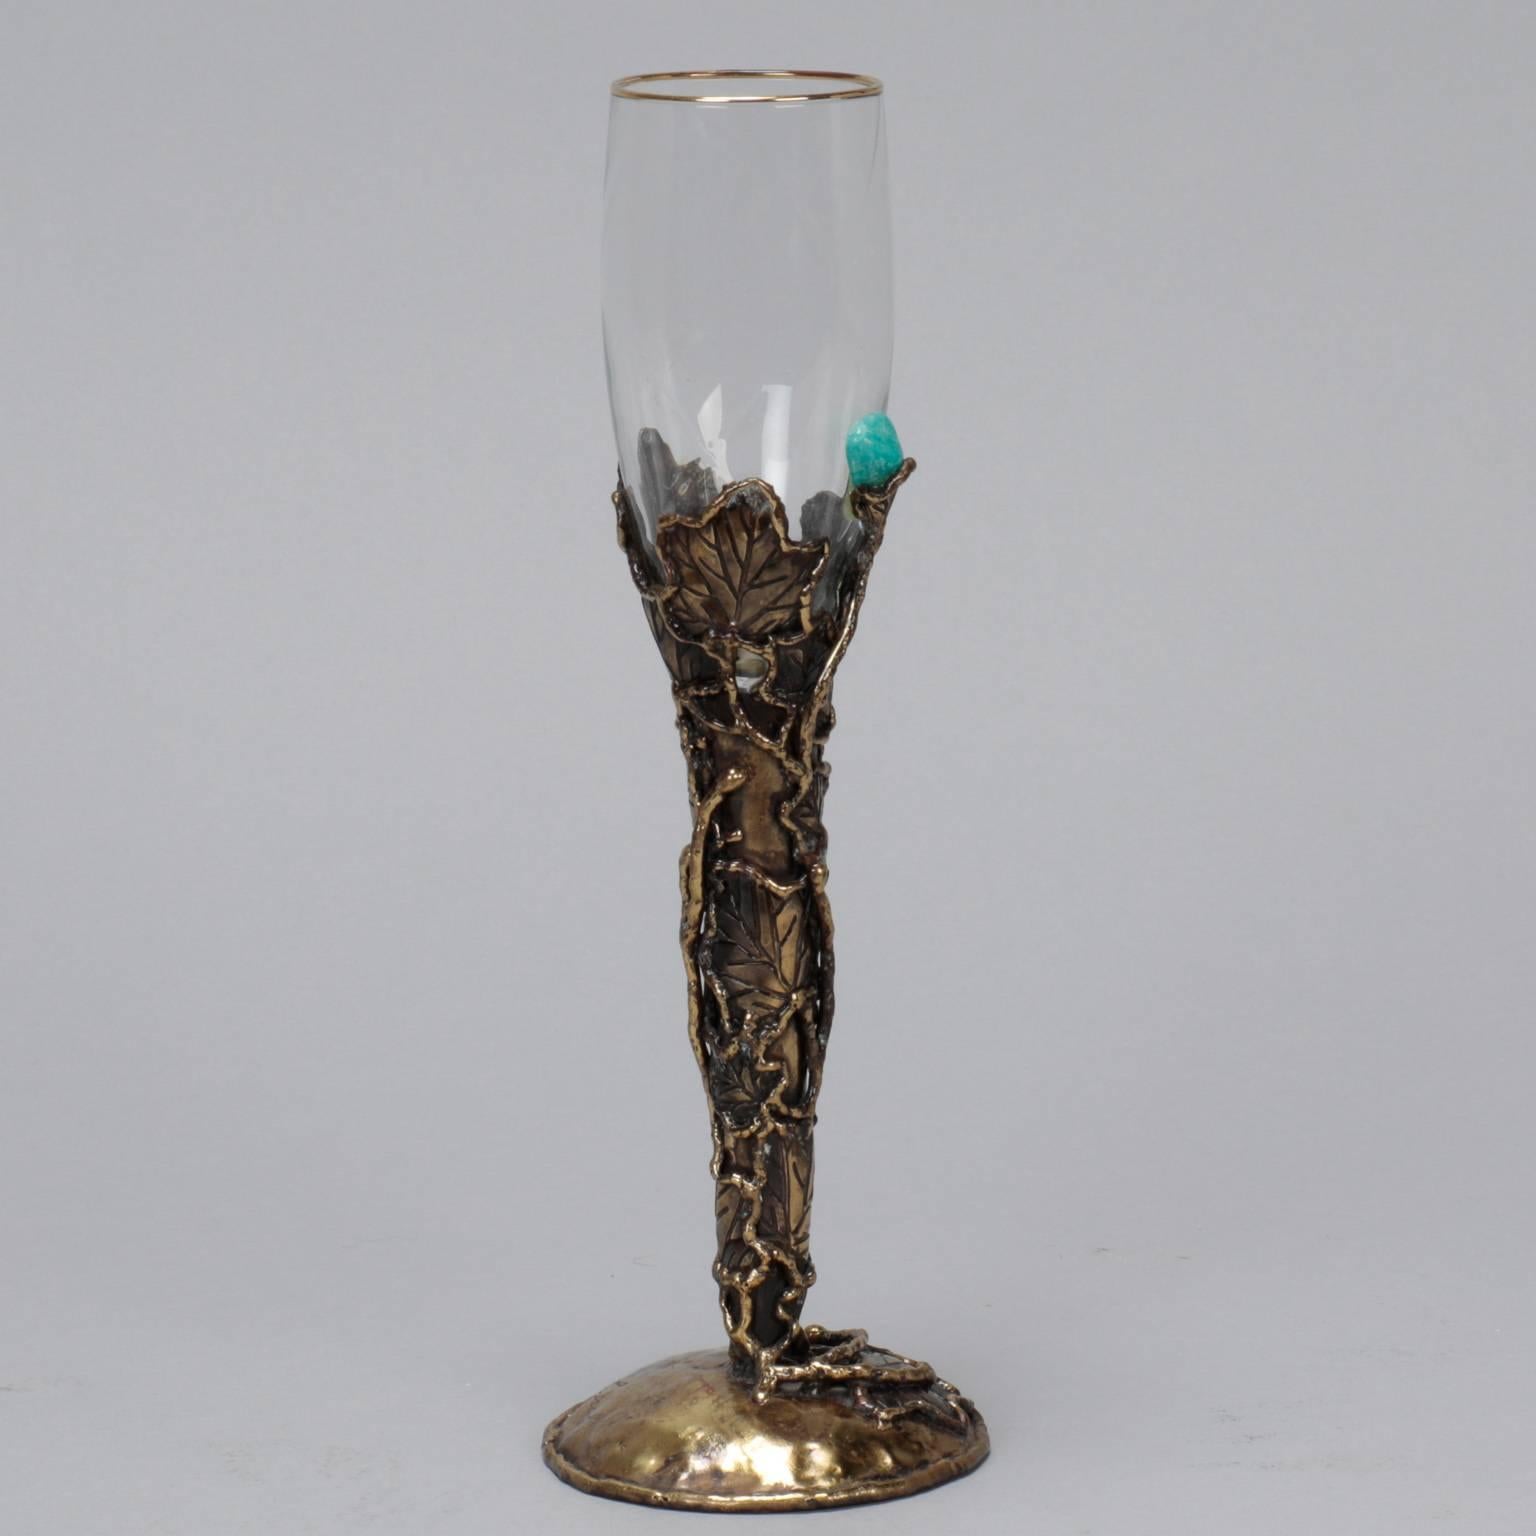 20th Century Mid-Century Artisan Signed Wine Glass with Metal Surround and Turquoise Stones 